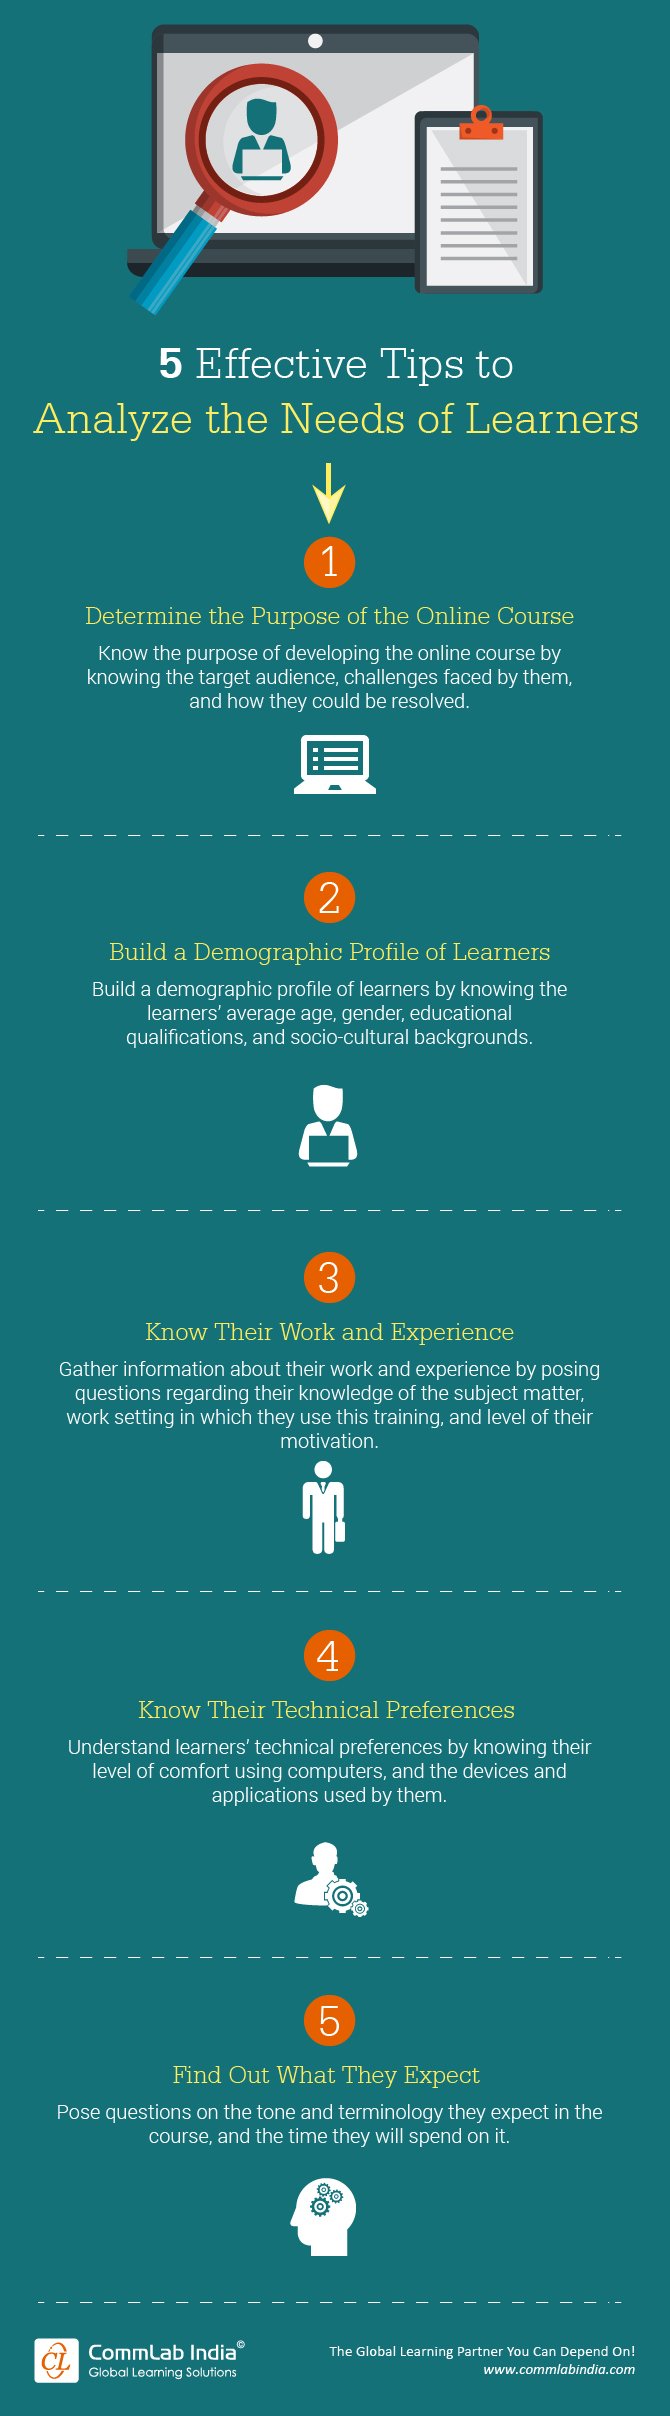 5 Effective Tips to Analyze the Needs of Online Learners [Infographic]